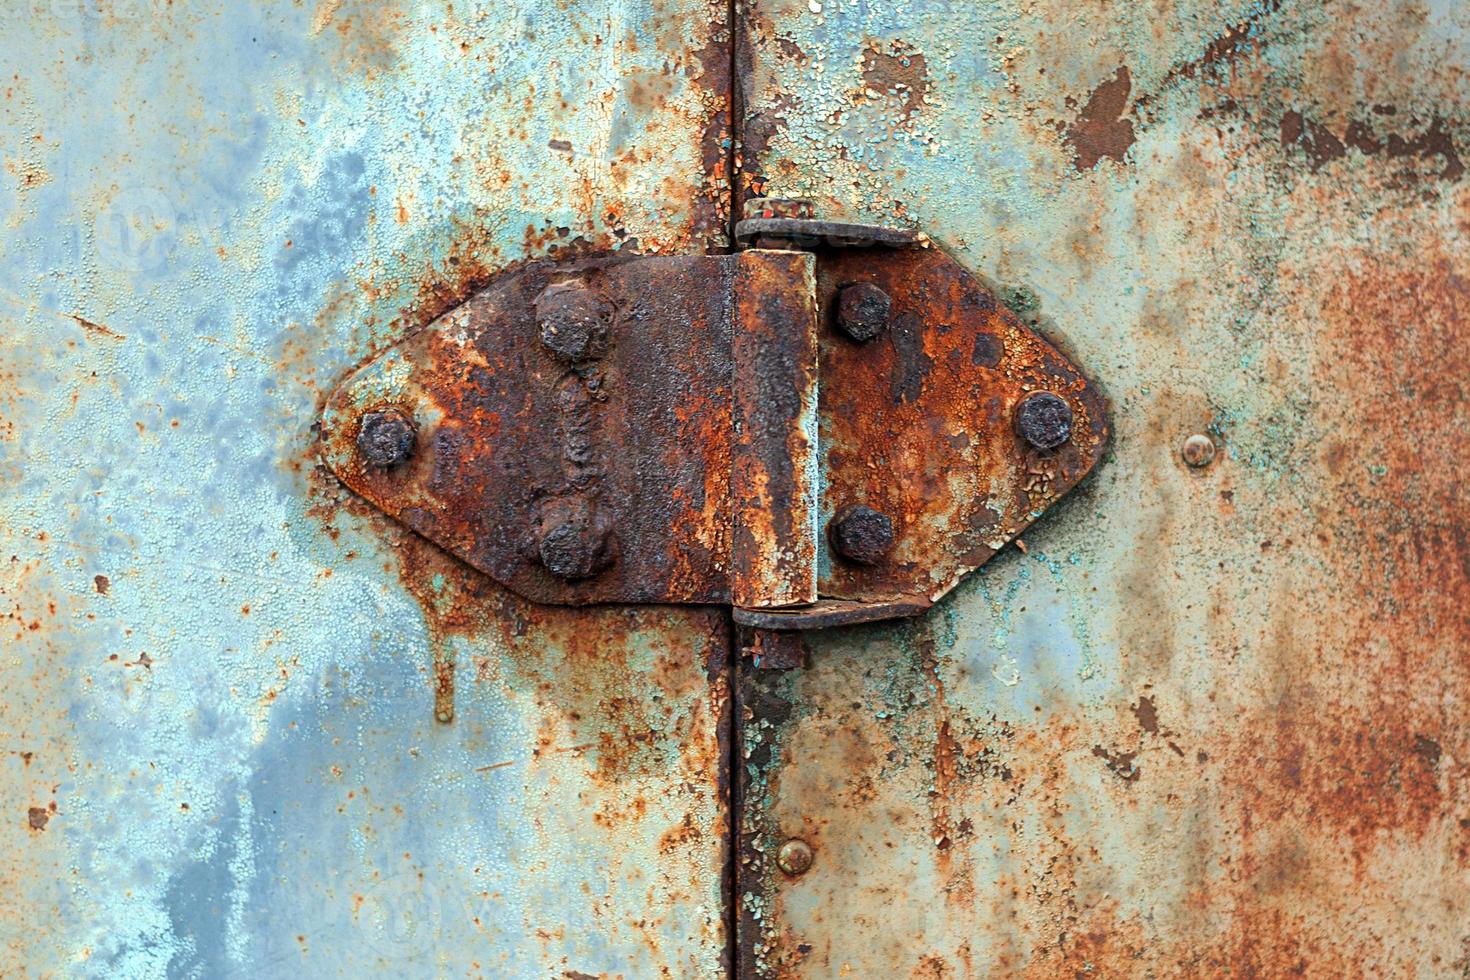 Rusty hinge on old rusted iron door, close-up photo